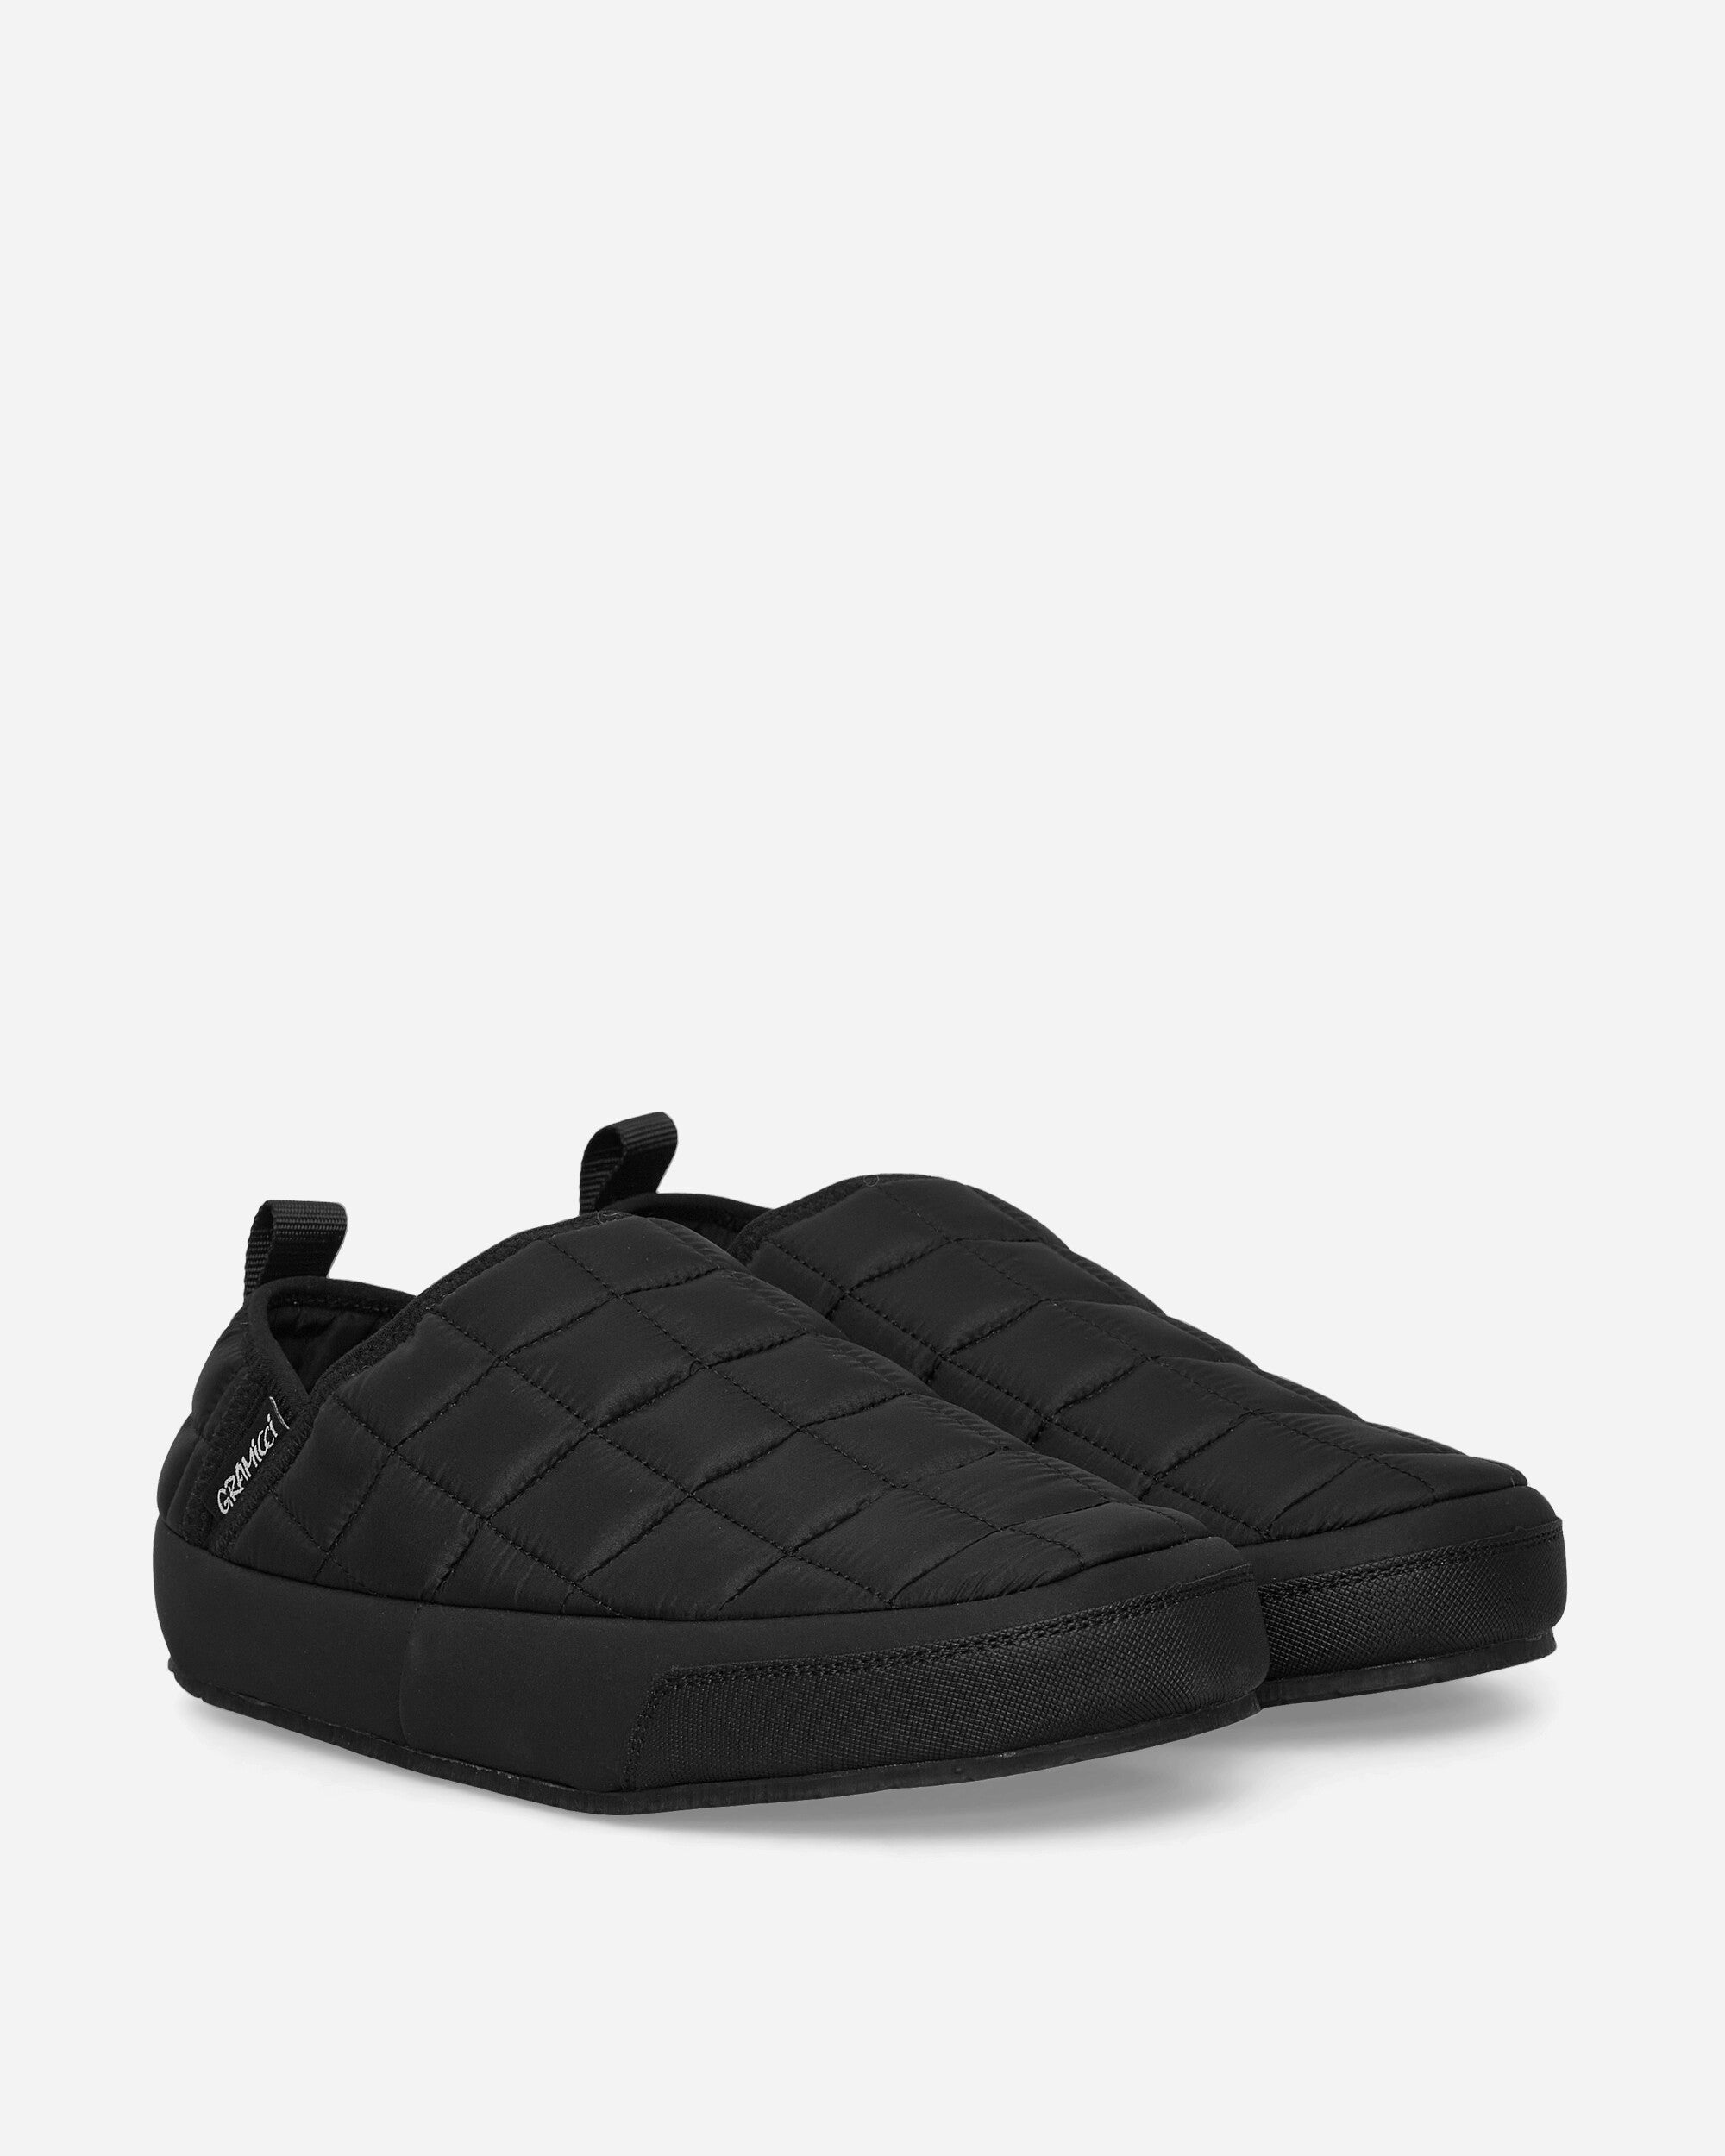 Thermal Moc Slippers Black